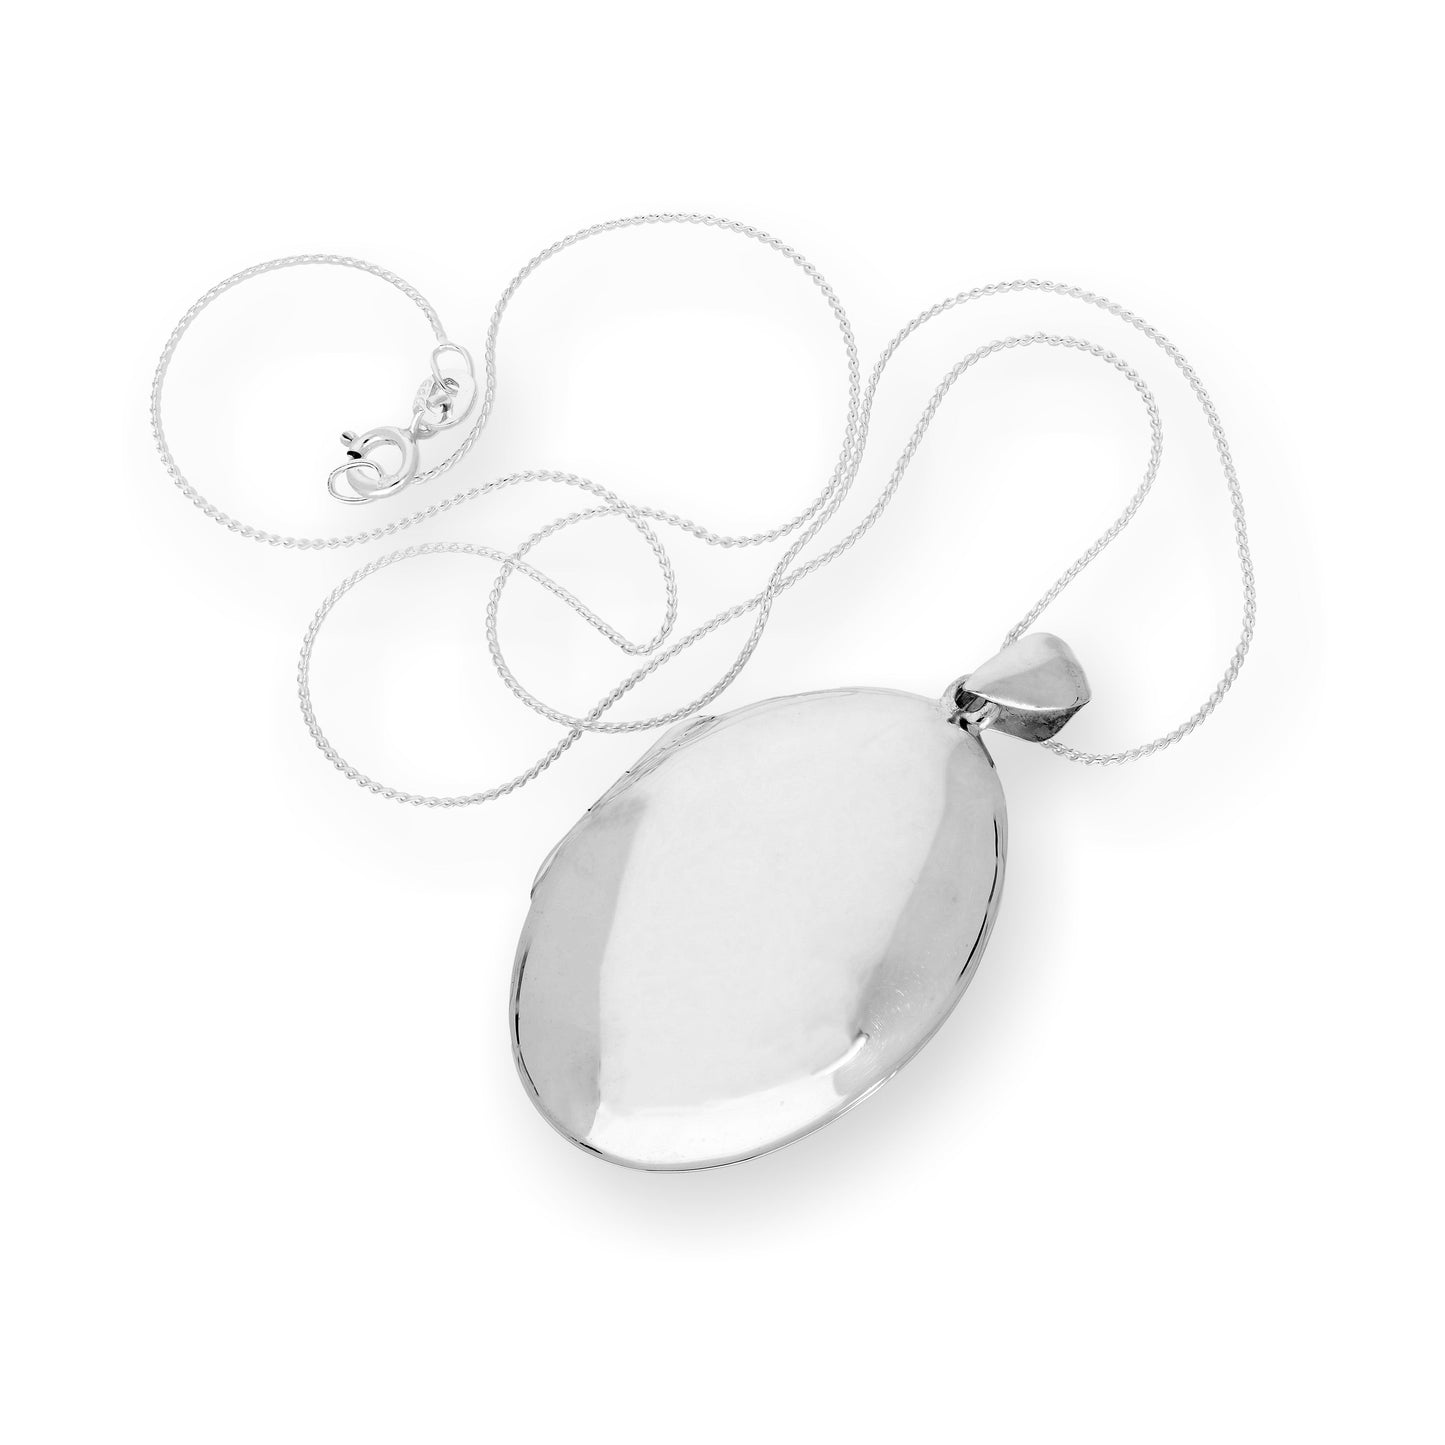 Large Sterling Silver Engravable Oval Locket on Chain 16 - 22 Inches